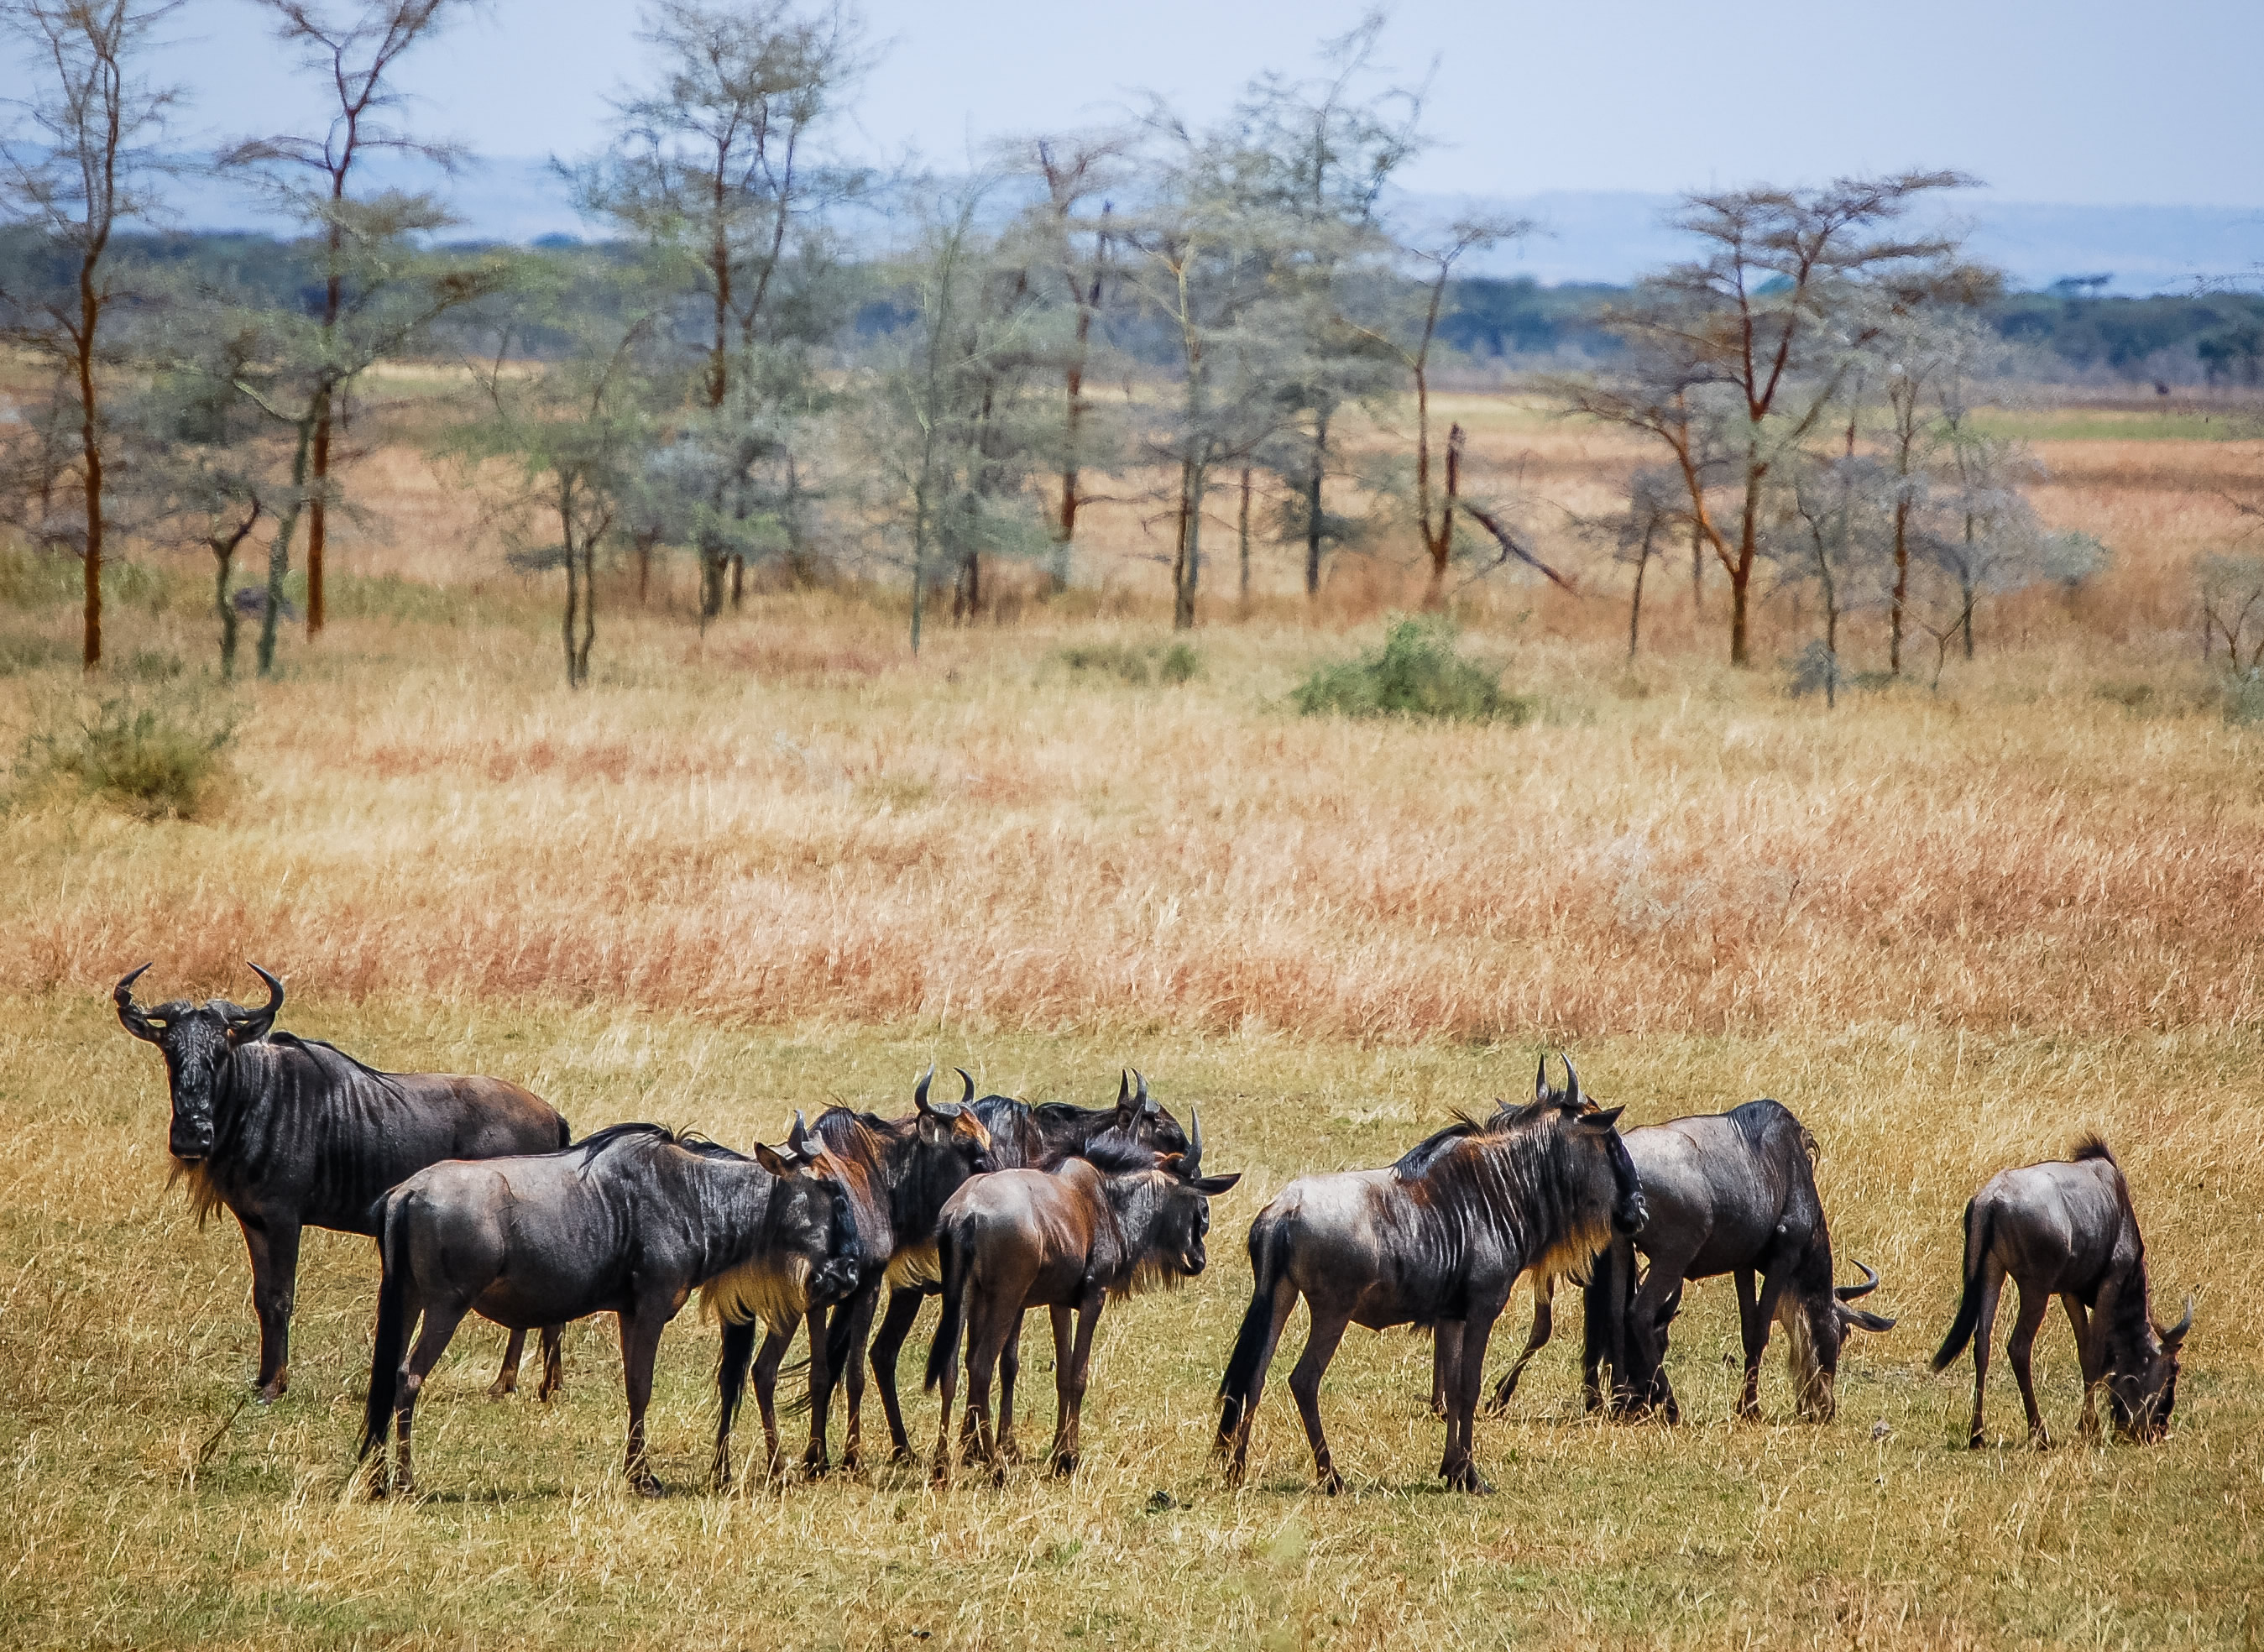 Small herd of blue wildebeest grazing in the Serengeti grassland. Click for larger image.